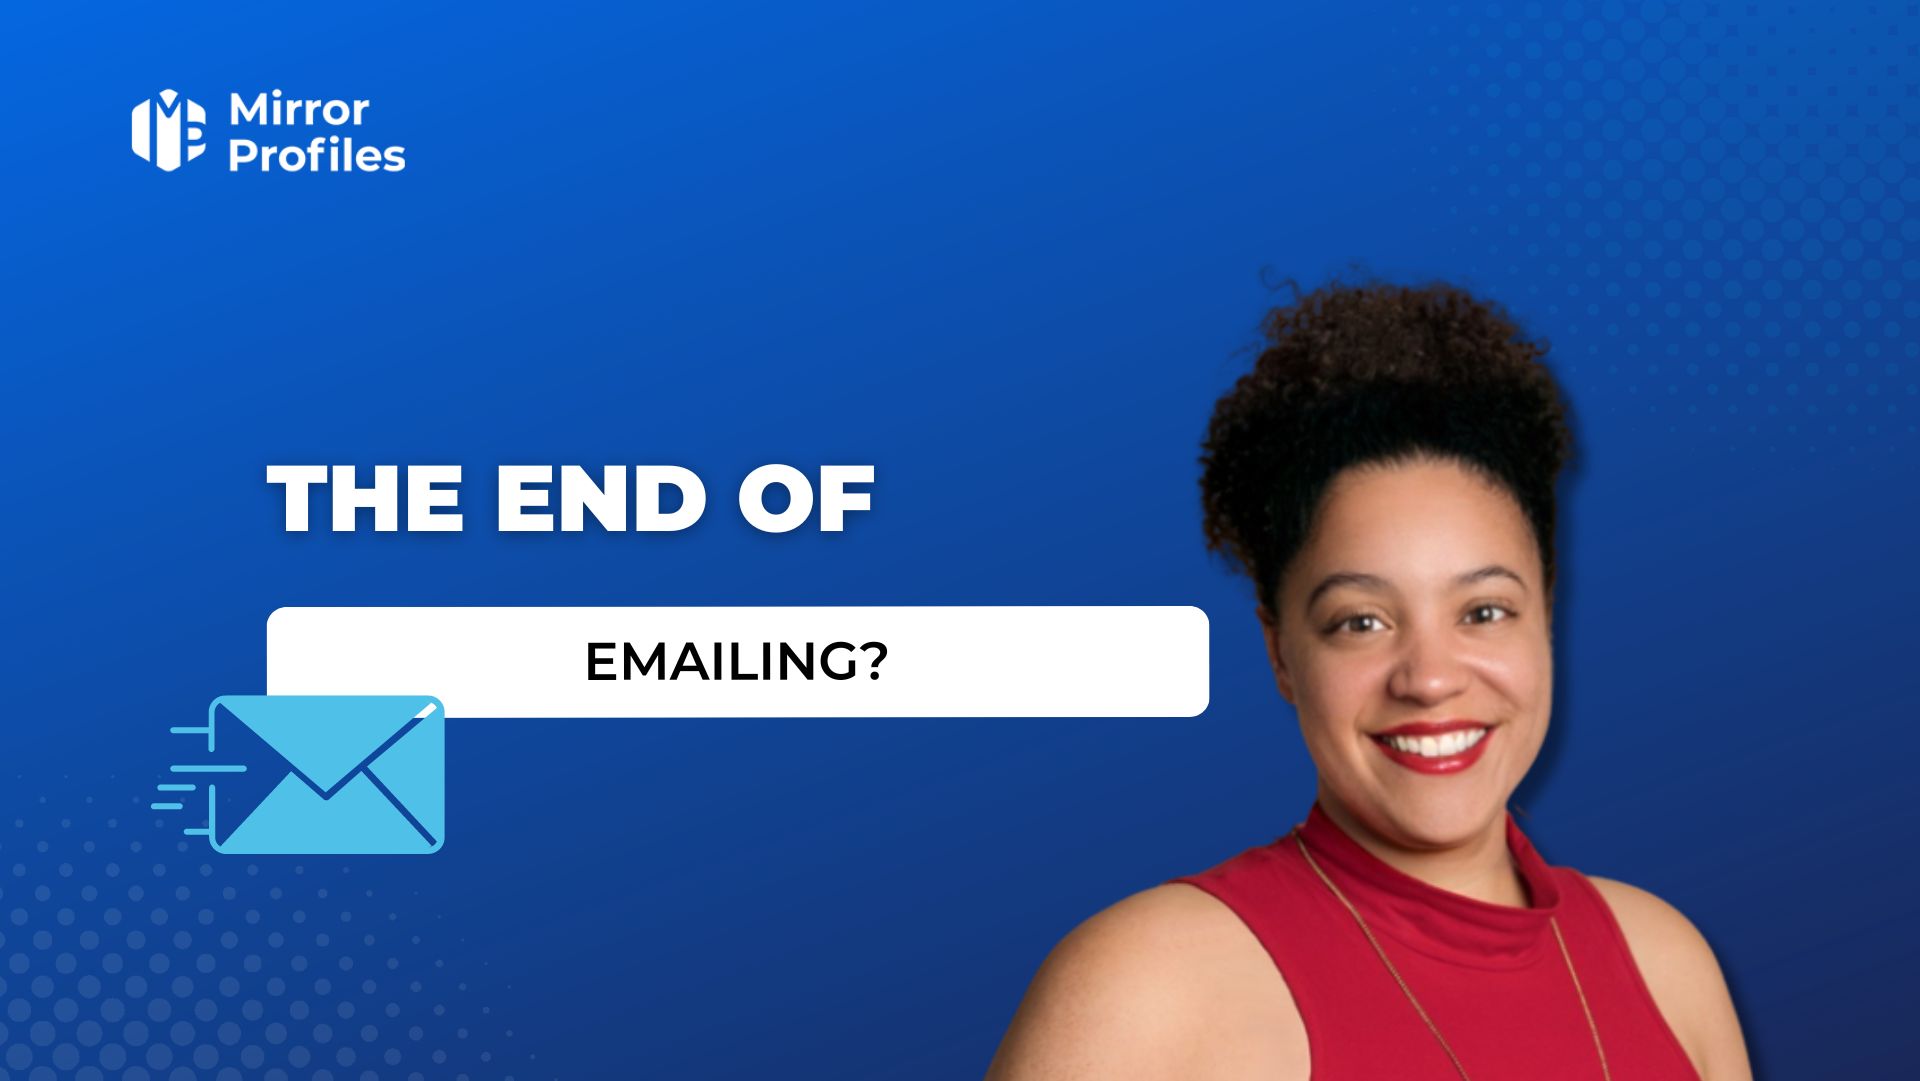 The end of emailing?